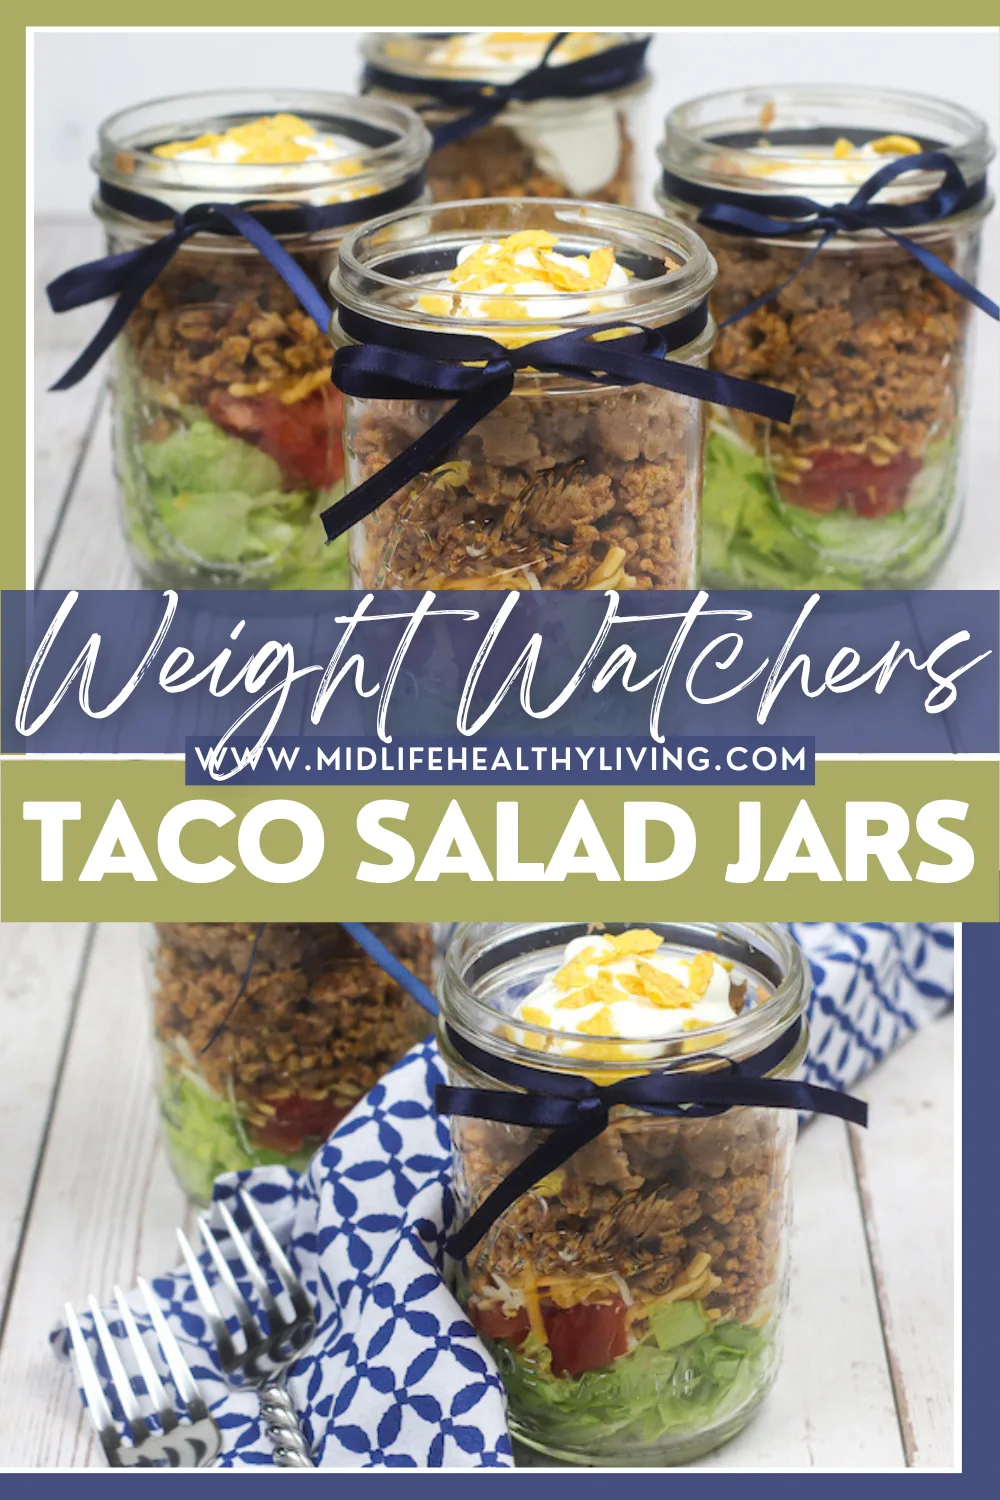 https://www.midlifehealthyliving.com/wp-content/uploads/2021/03/Taco-Salad-In-A-Jar-Recipe-Pin.png.webp